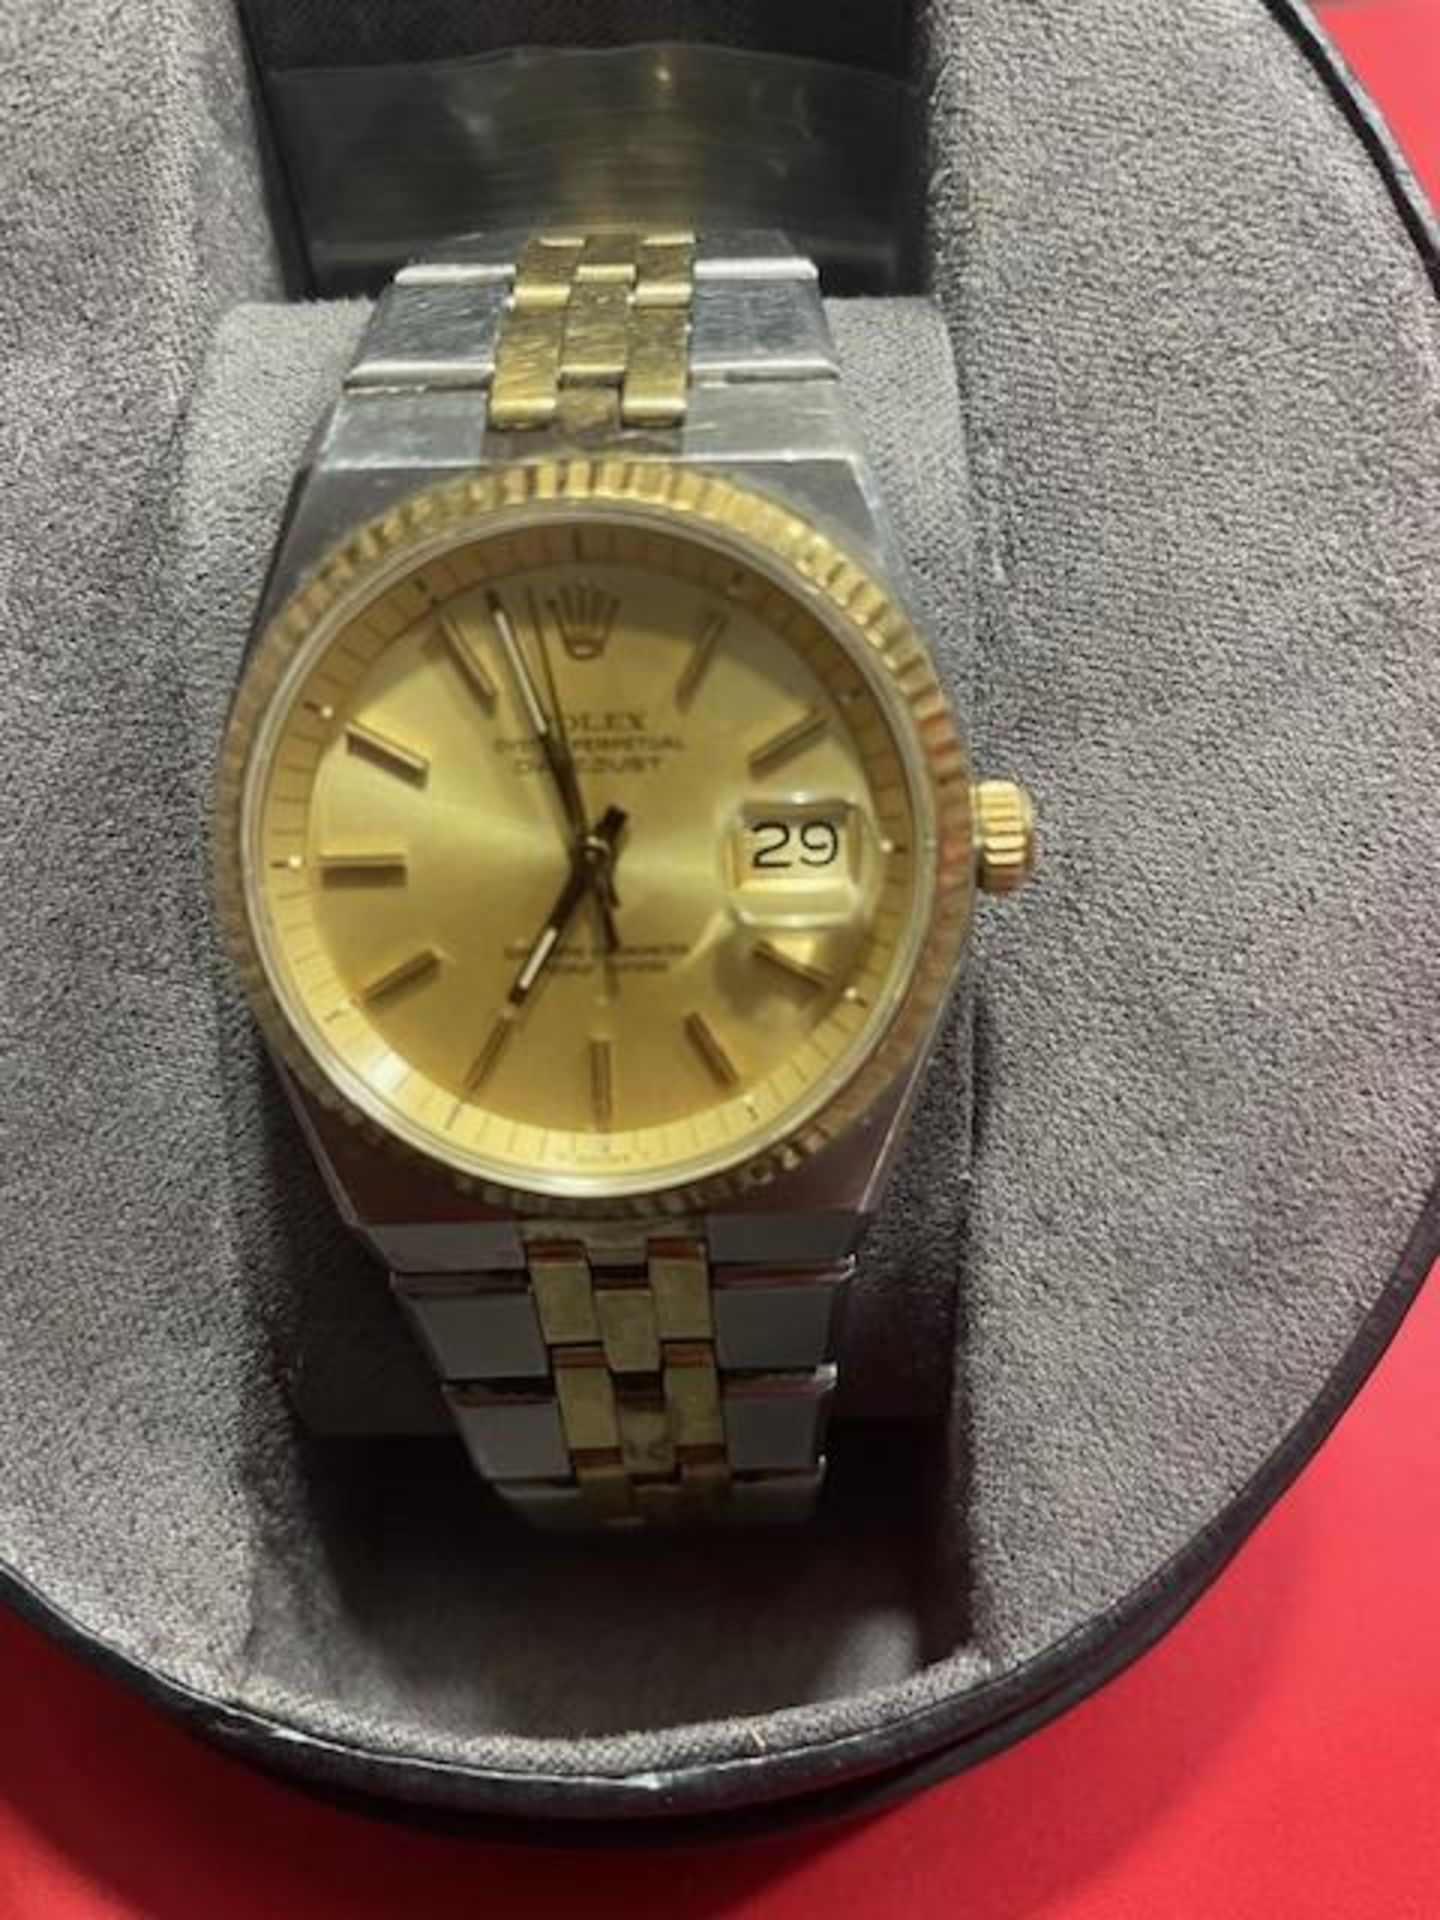 Rolex Oyster Purpetual DATEJUST Mens Watch - Image 2 of 10